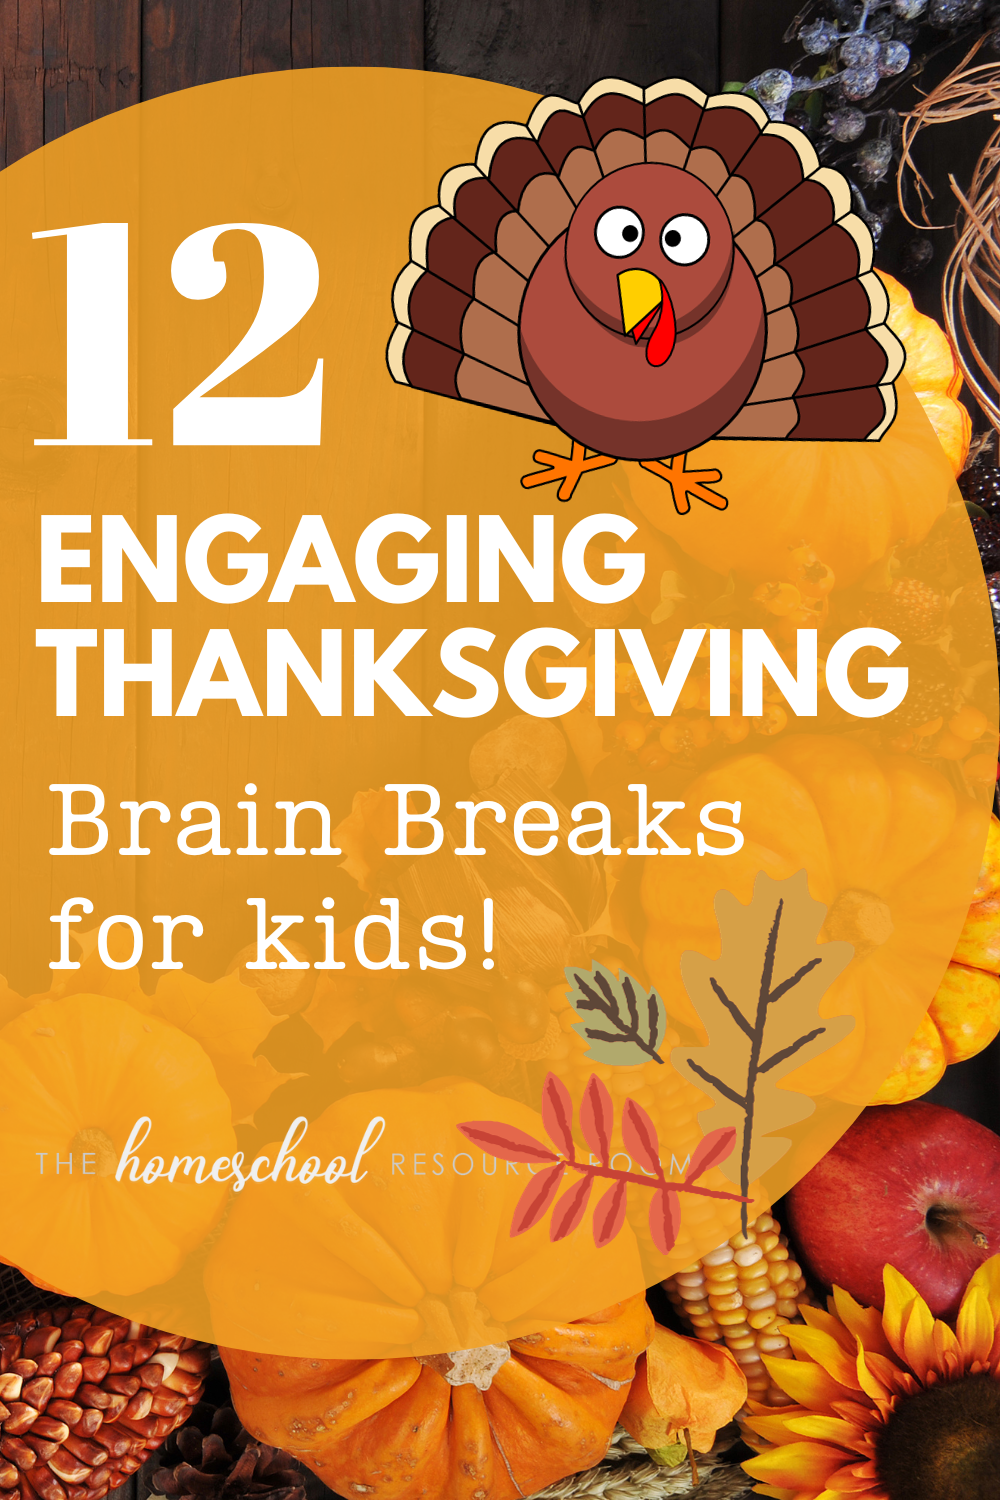 12 engaging and energizing Thanksgiving brain breaks for kids! Activities to engage and energize!